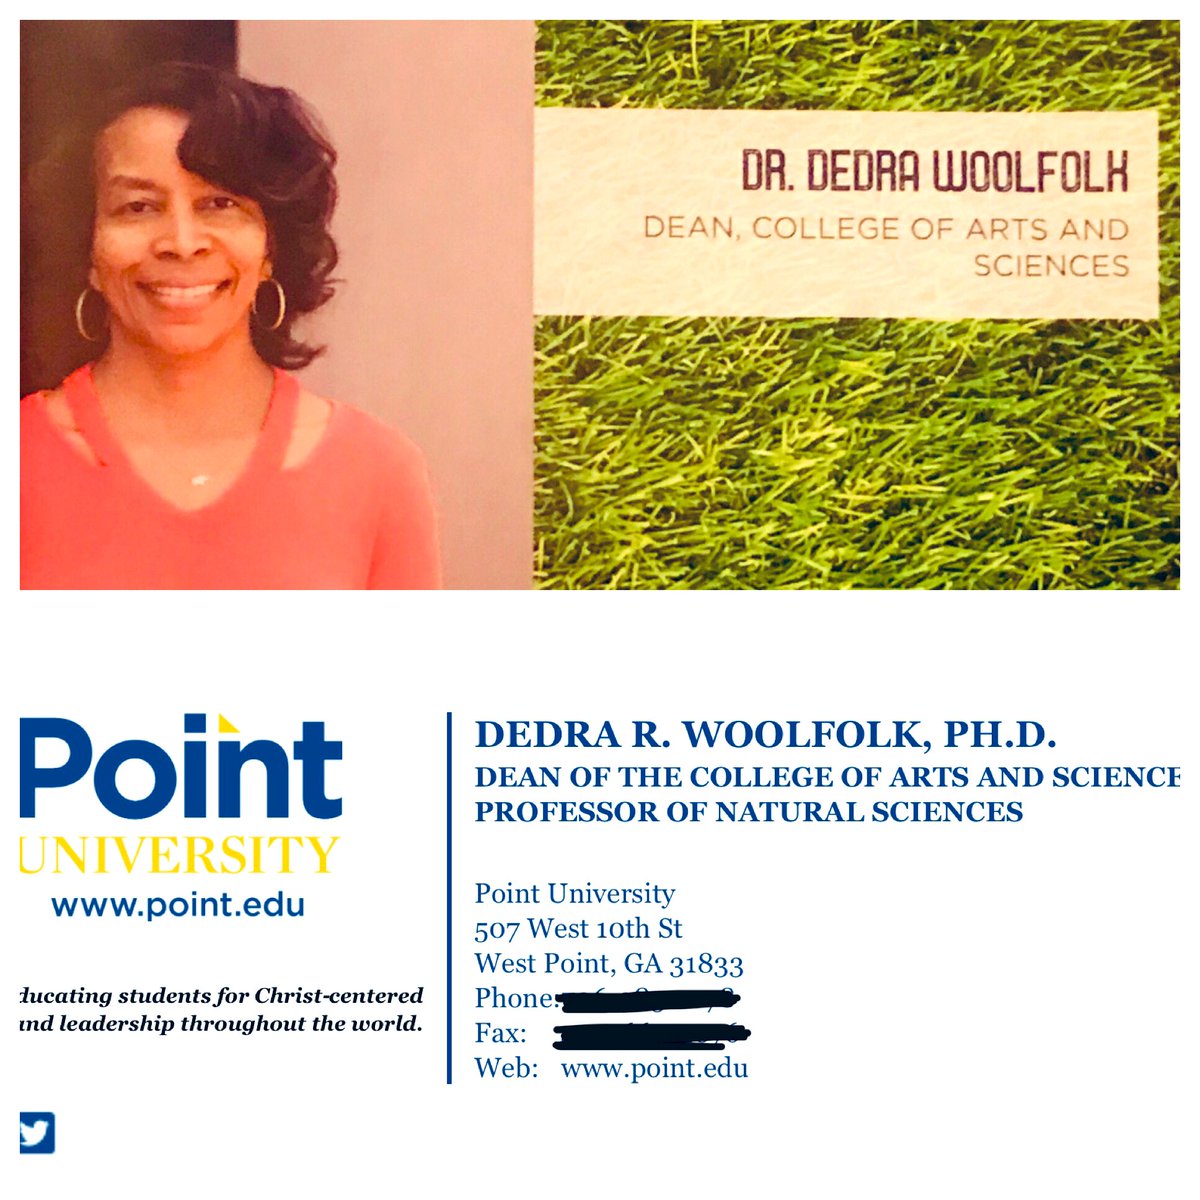 Please join me in Congratulating the new Dean of the College of Arts and Sciences at Point University - Dr. Dedra Woolfolk!!

I am SO VERY PROUD of you!!

#DMTherrellHighSchool
#MorrisBrownCollege
#EmoryUniversity